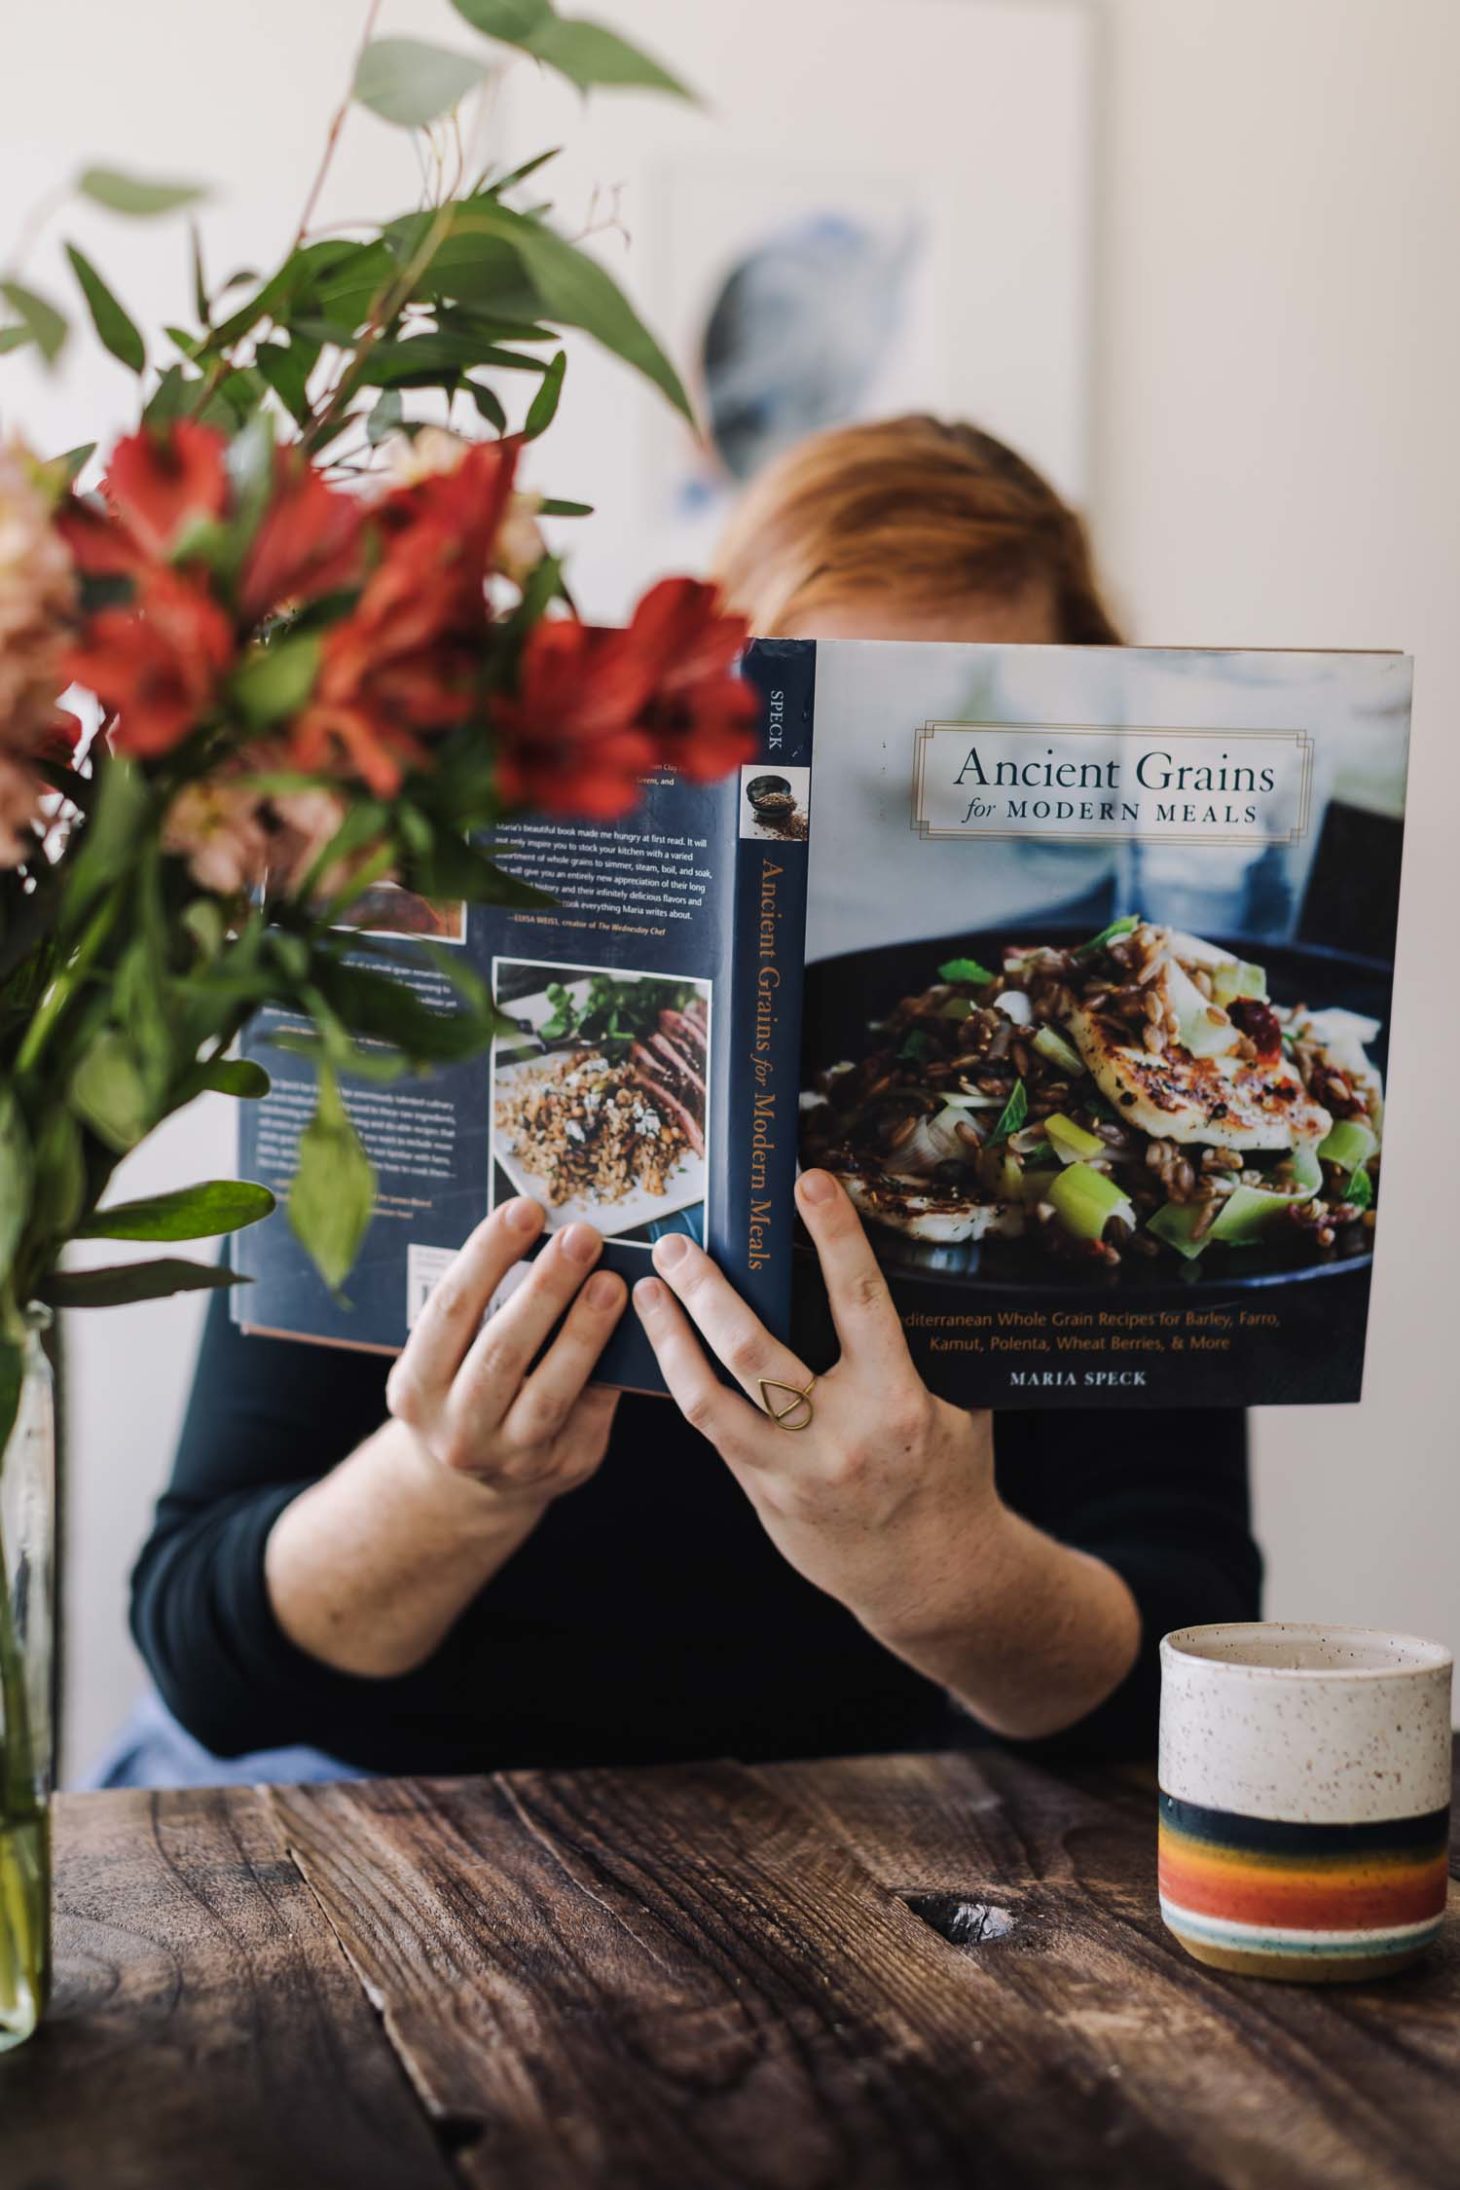 Ancient Grains for Modern Meals: Mediterranean Whole Grain Recipes for Barley, Farro, Kamut, Polenta, Wheat Berries & More by Maria Speck